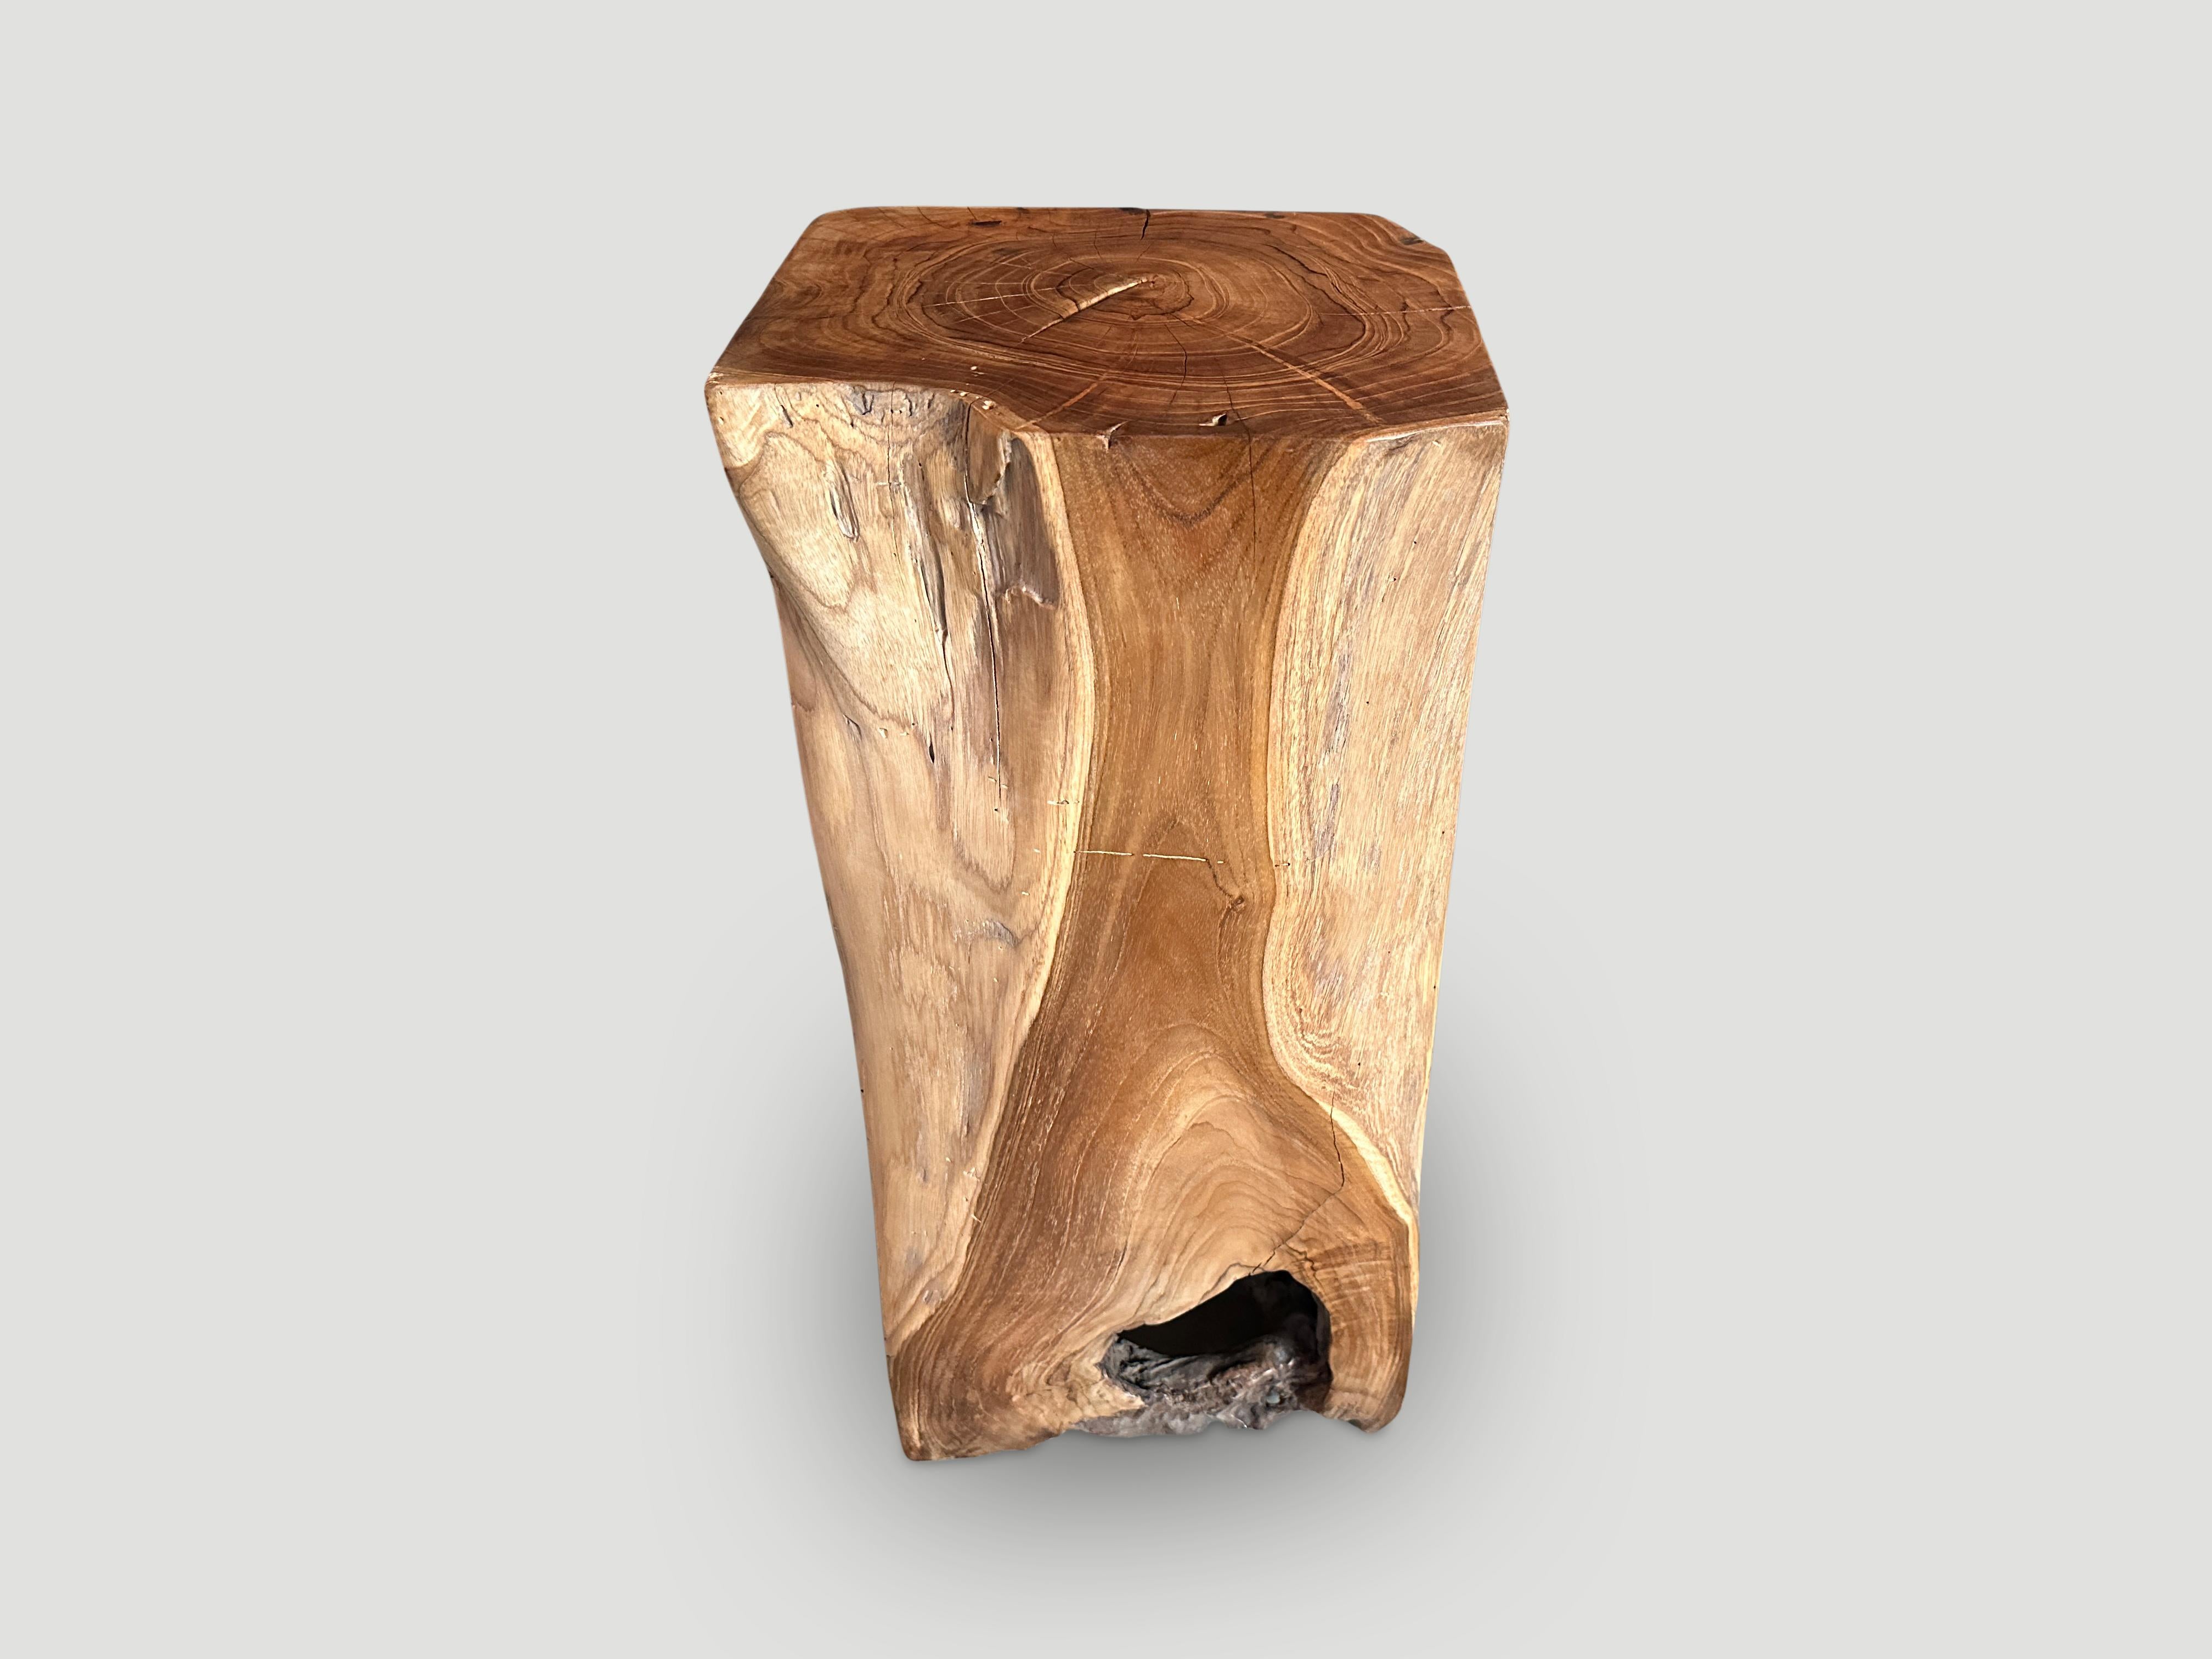 Reclaimed teak wood pedestal or side table hand carved into this usable shape whilst respecting the organic wood. Polished with a natural oil revealing the beautiful wood grain and textures. Both usable and sculptural.

This side table or pedestal